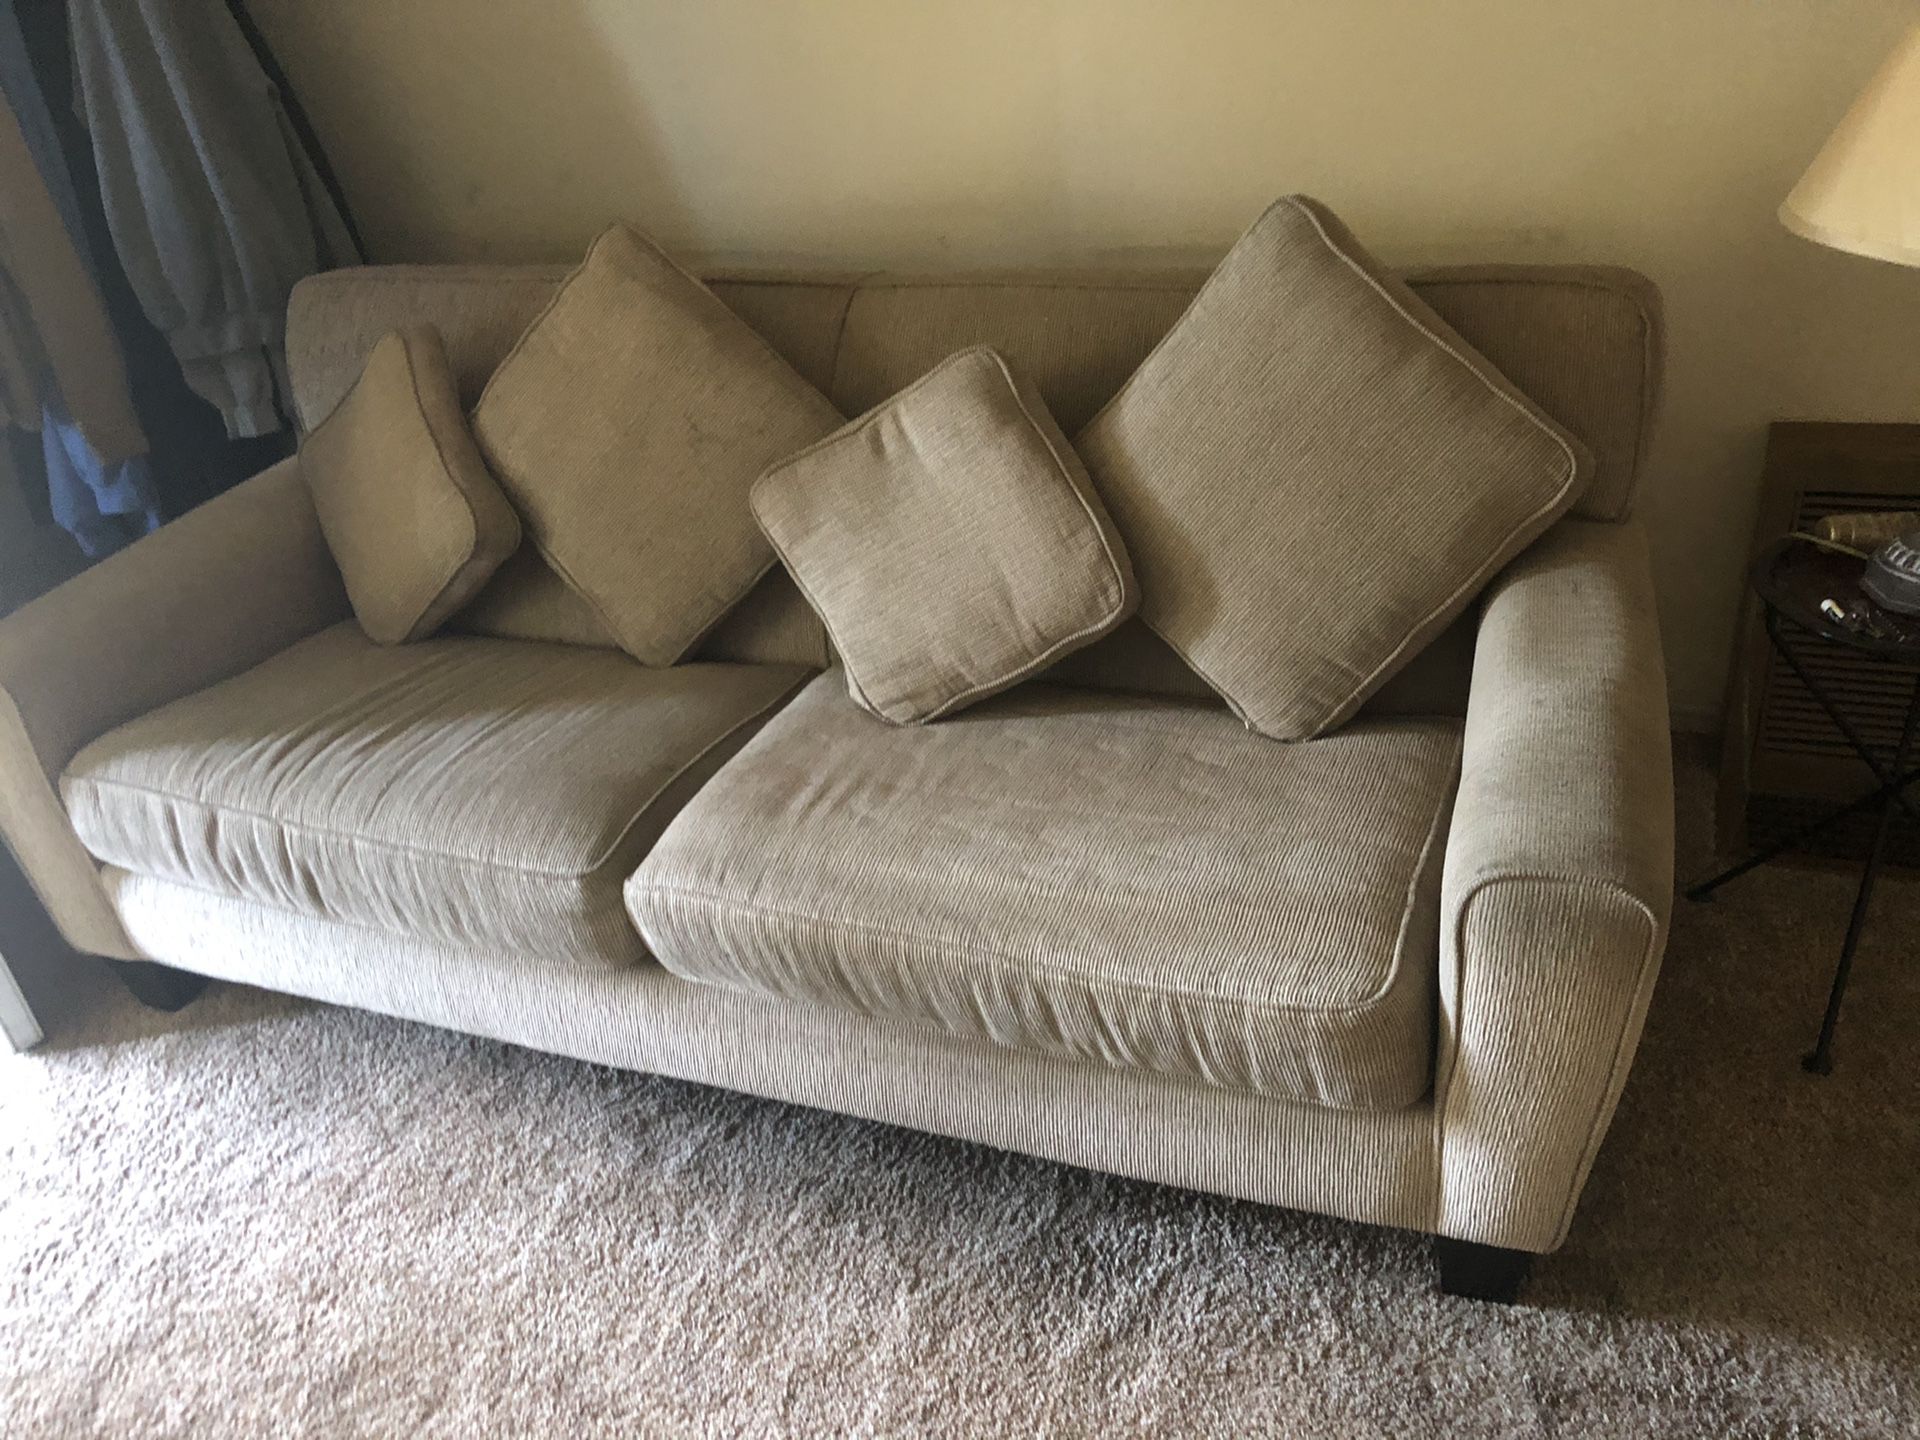 FREE ...... Couch and chair